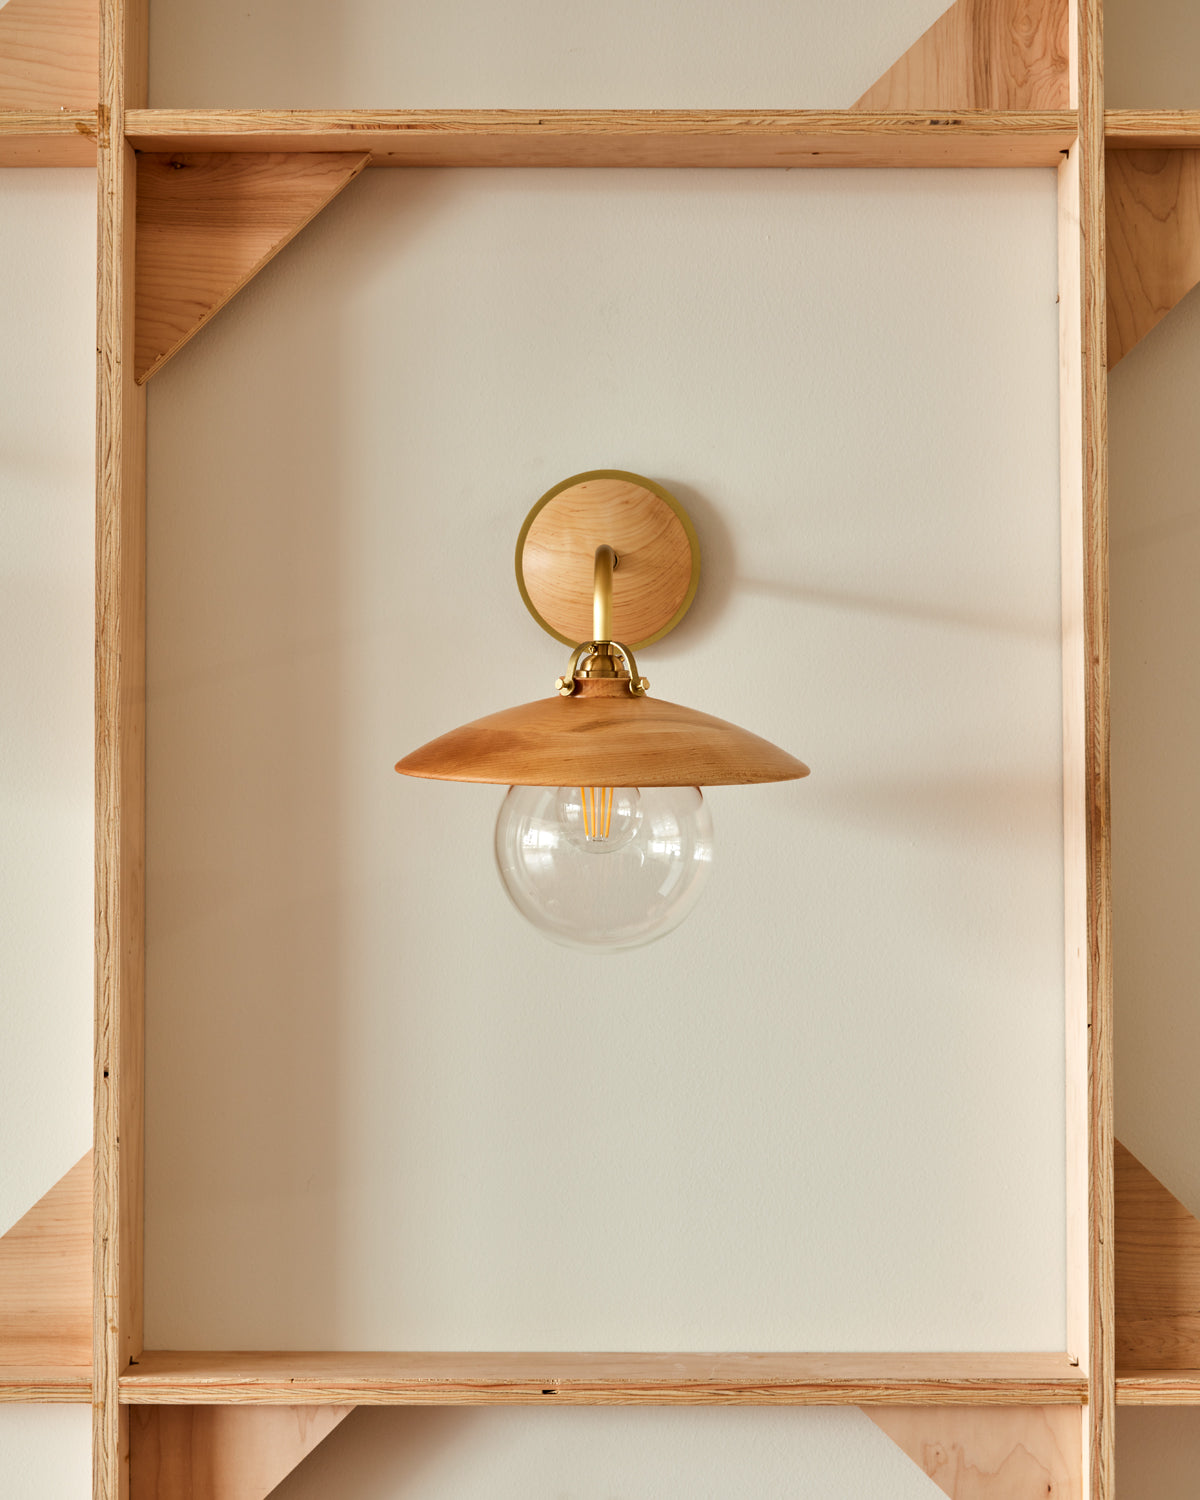 Hardwired satin brass wall sconce with decorative wooden natural maple shade and glass globe